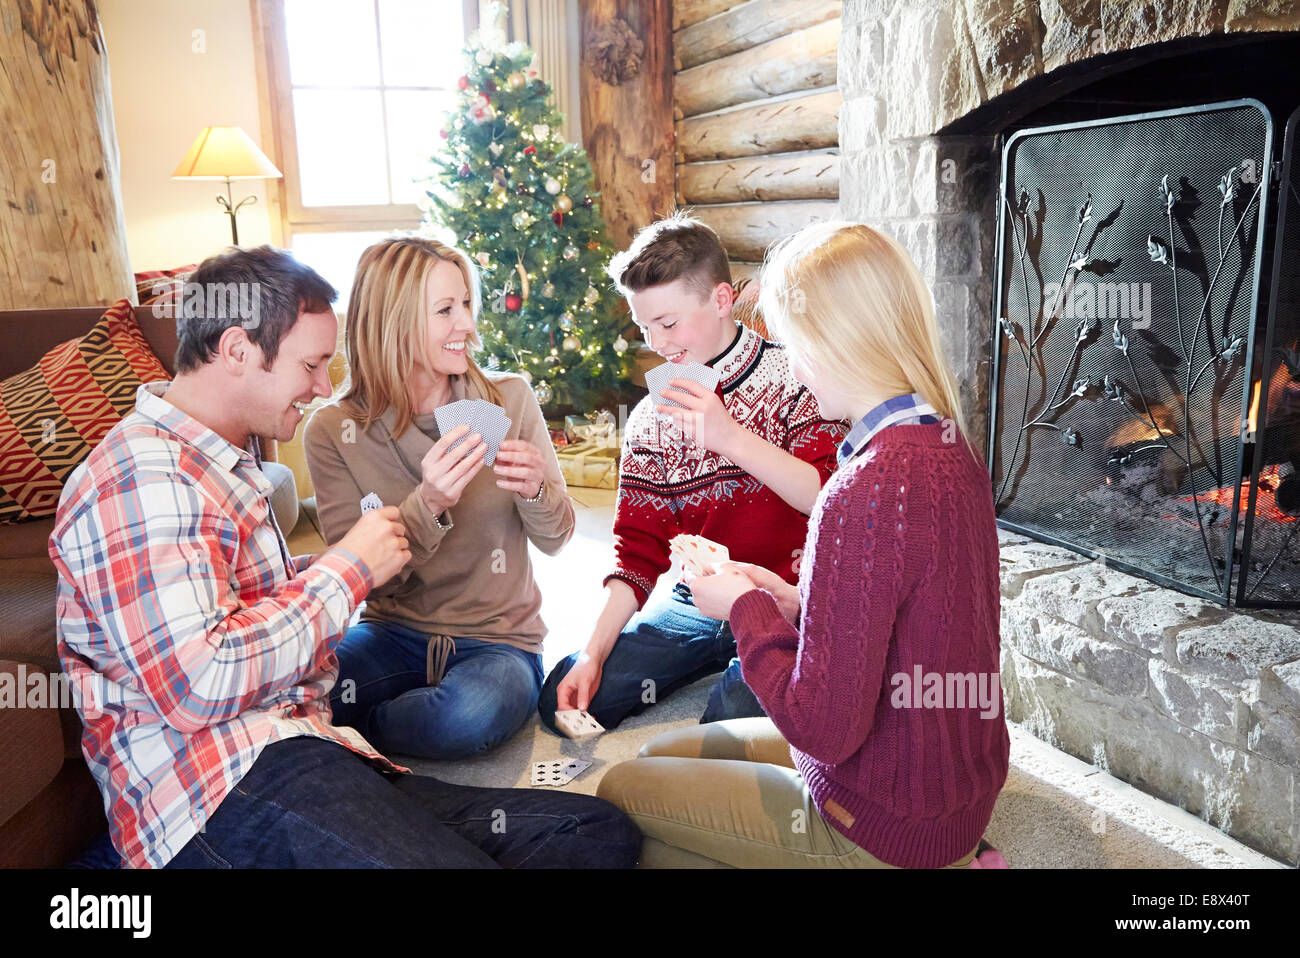 Family playing card game together Stock Photo